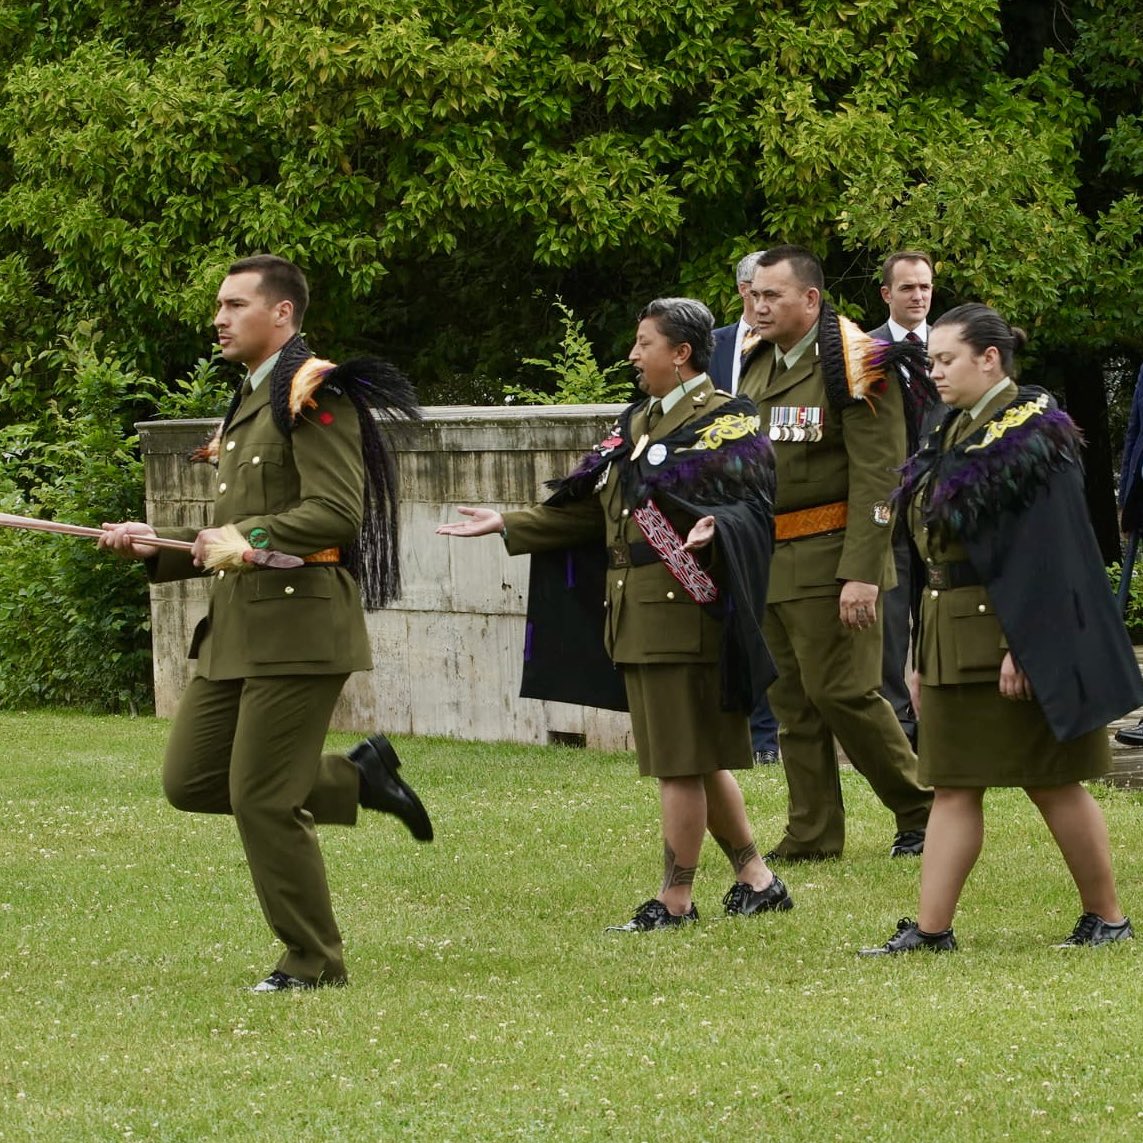 We were honoured to host the New Zealand commemoration of the 80th anniversary of the Battle of Monte Cassino. The Torch of Commemoration was present for the first time today at a commemorative anniversary event, it will subsequently continue to tour the UK before heading to